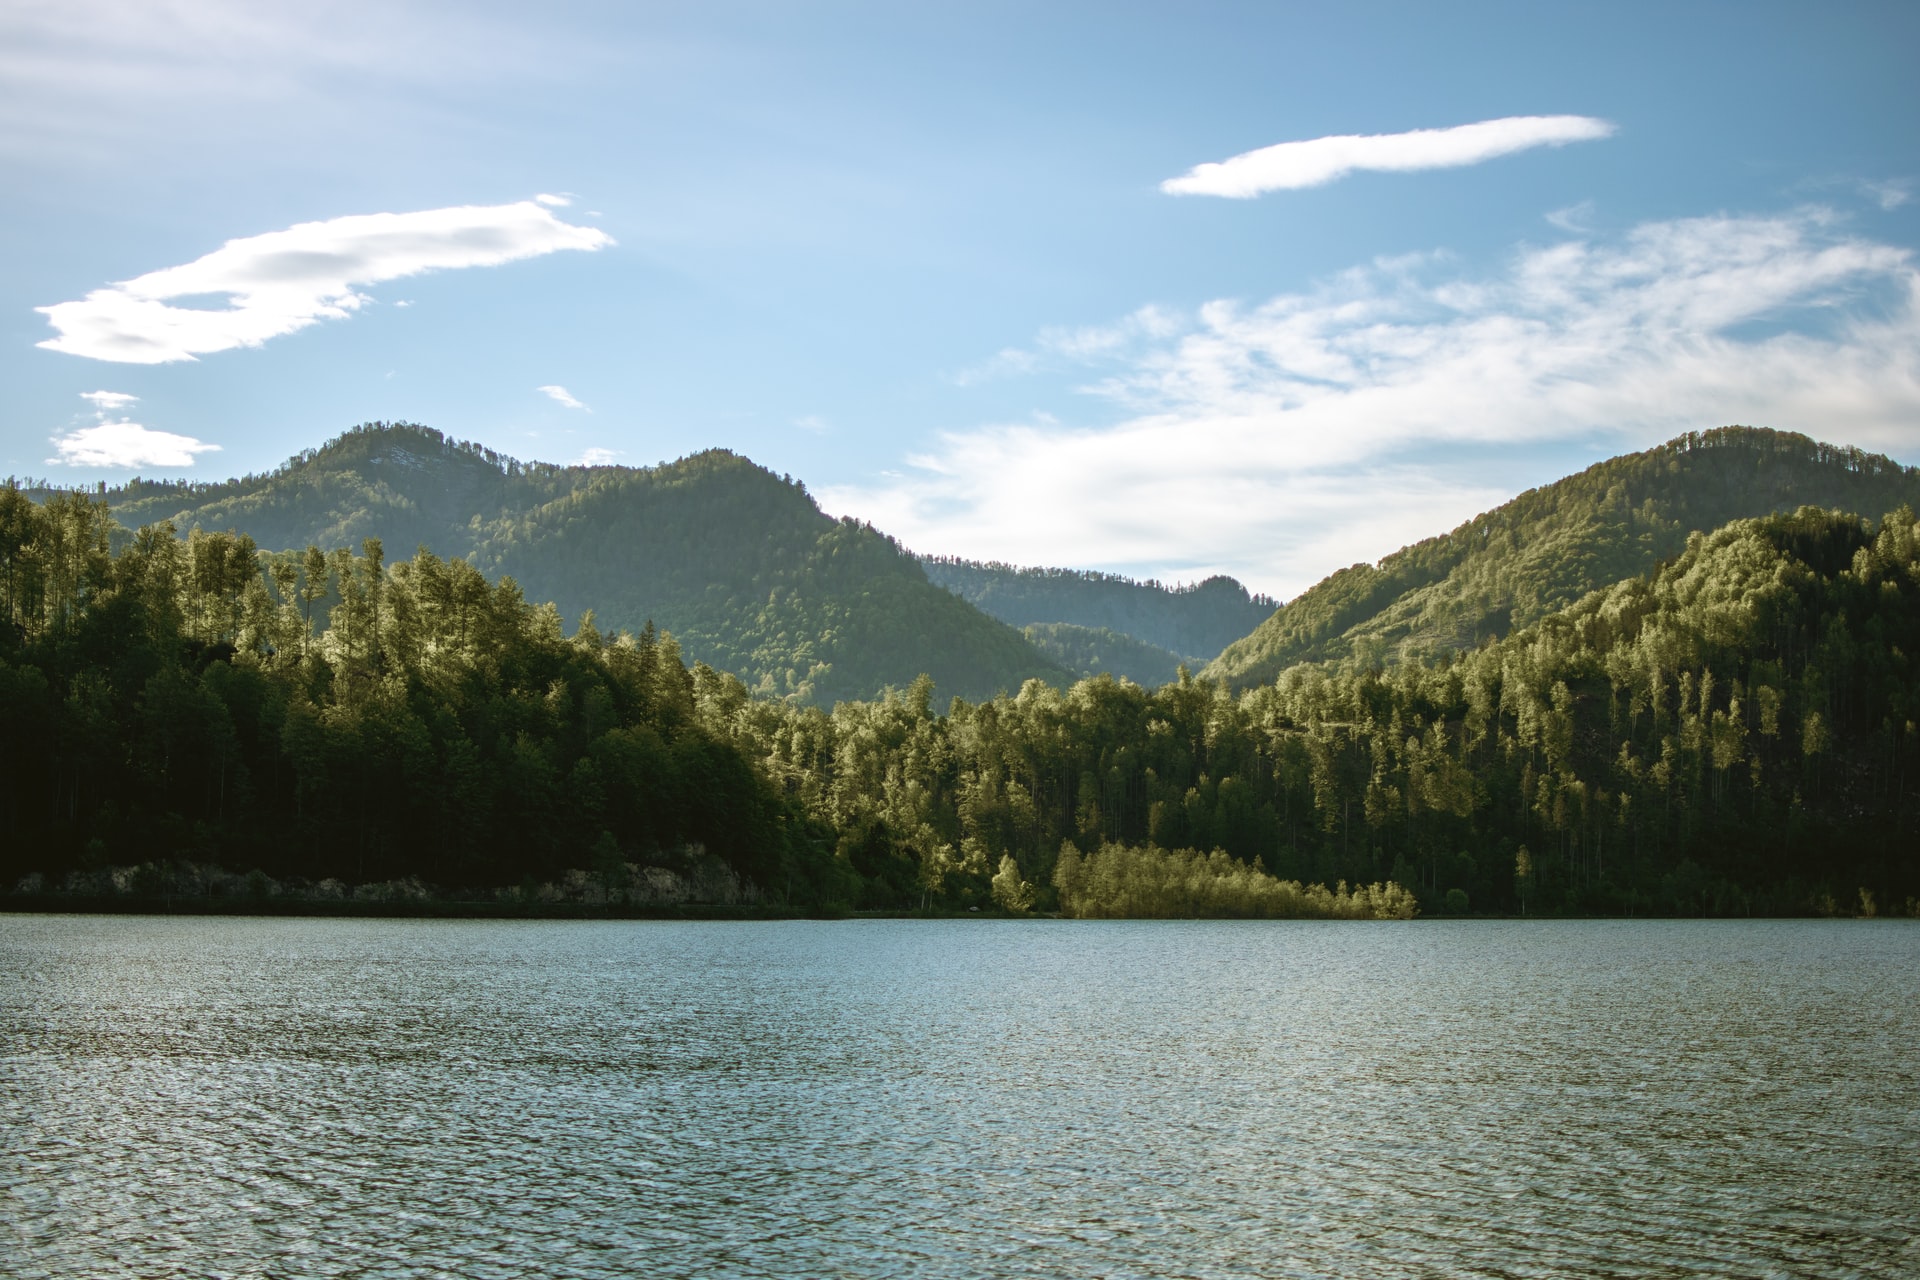 A calm lake bordered by hills of forest.